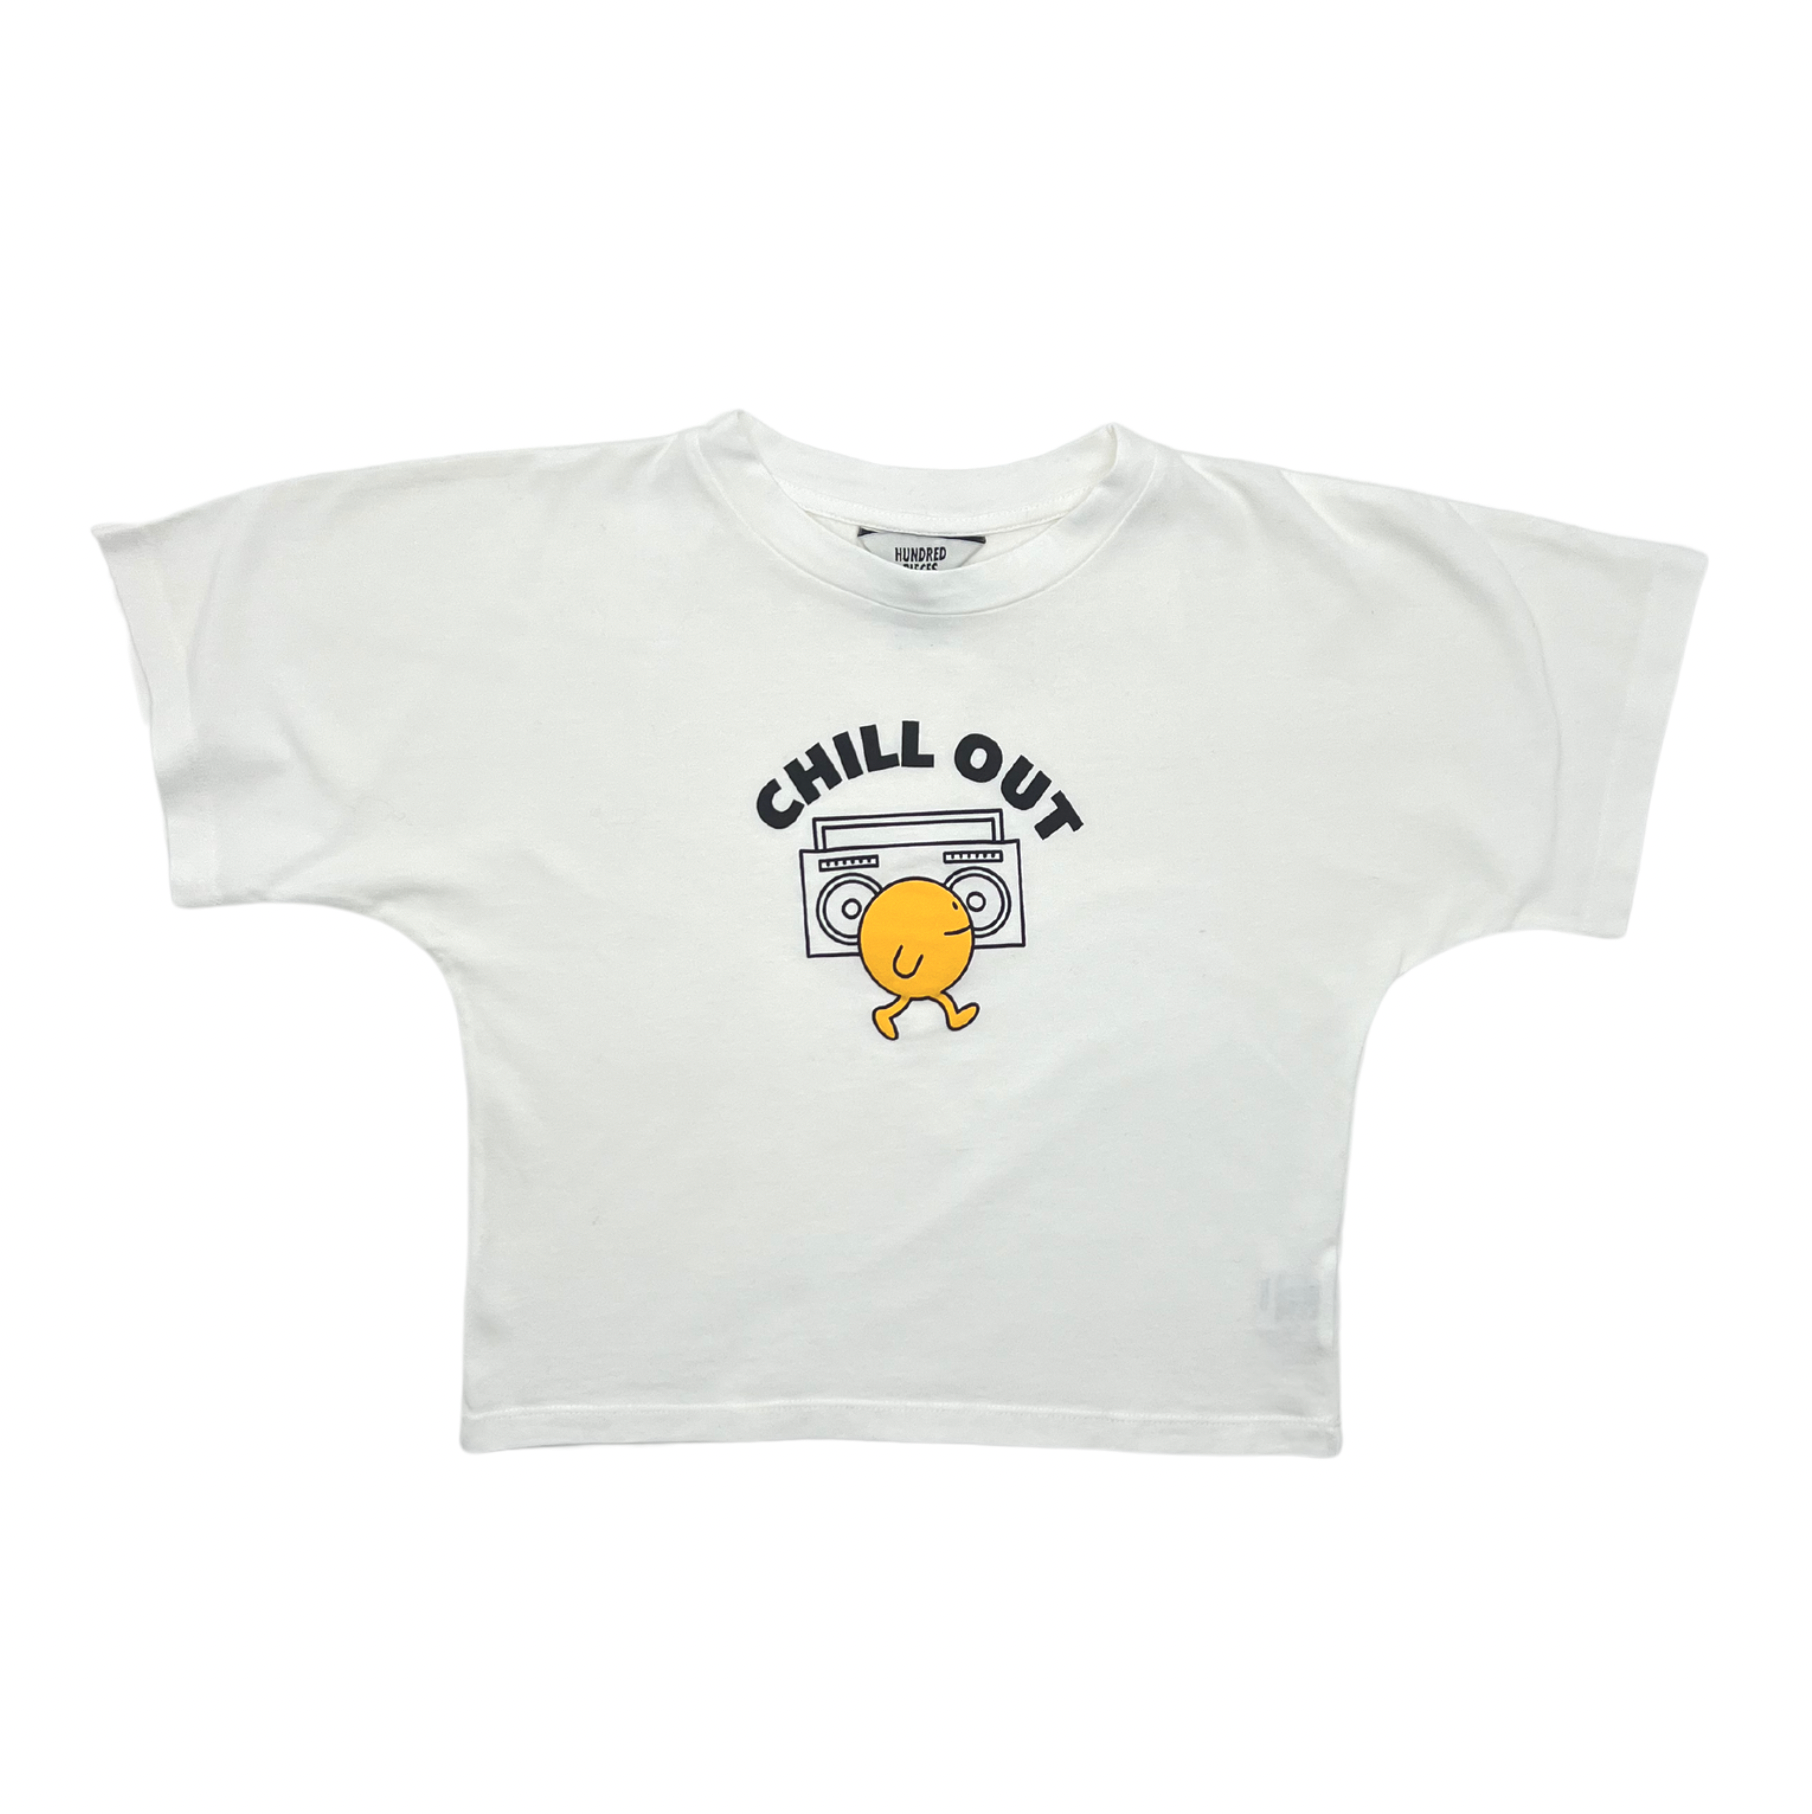 HUNDRED PIECES - "Chill out" t-shirt - 8 years old